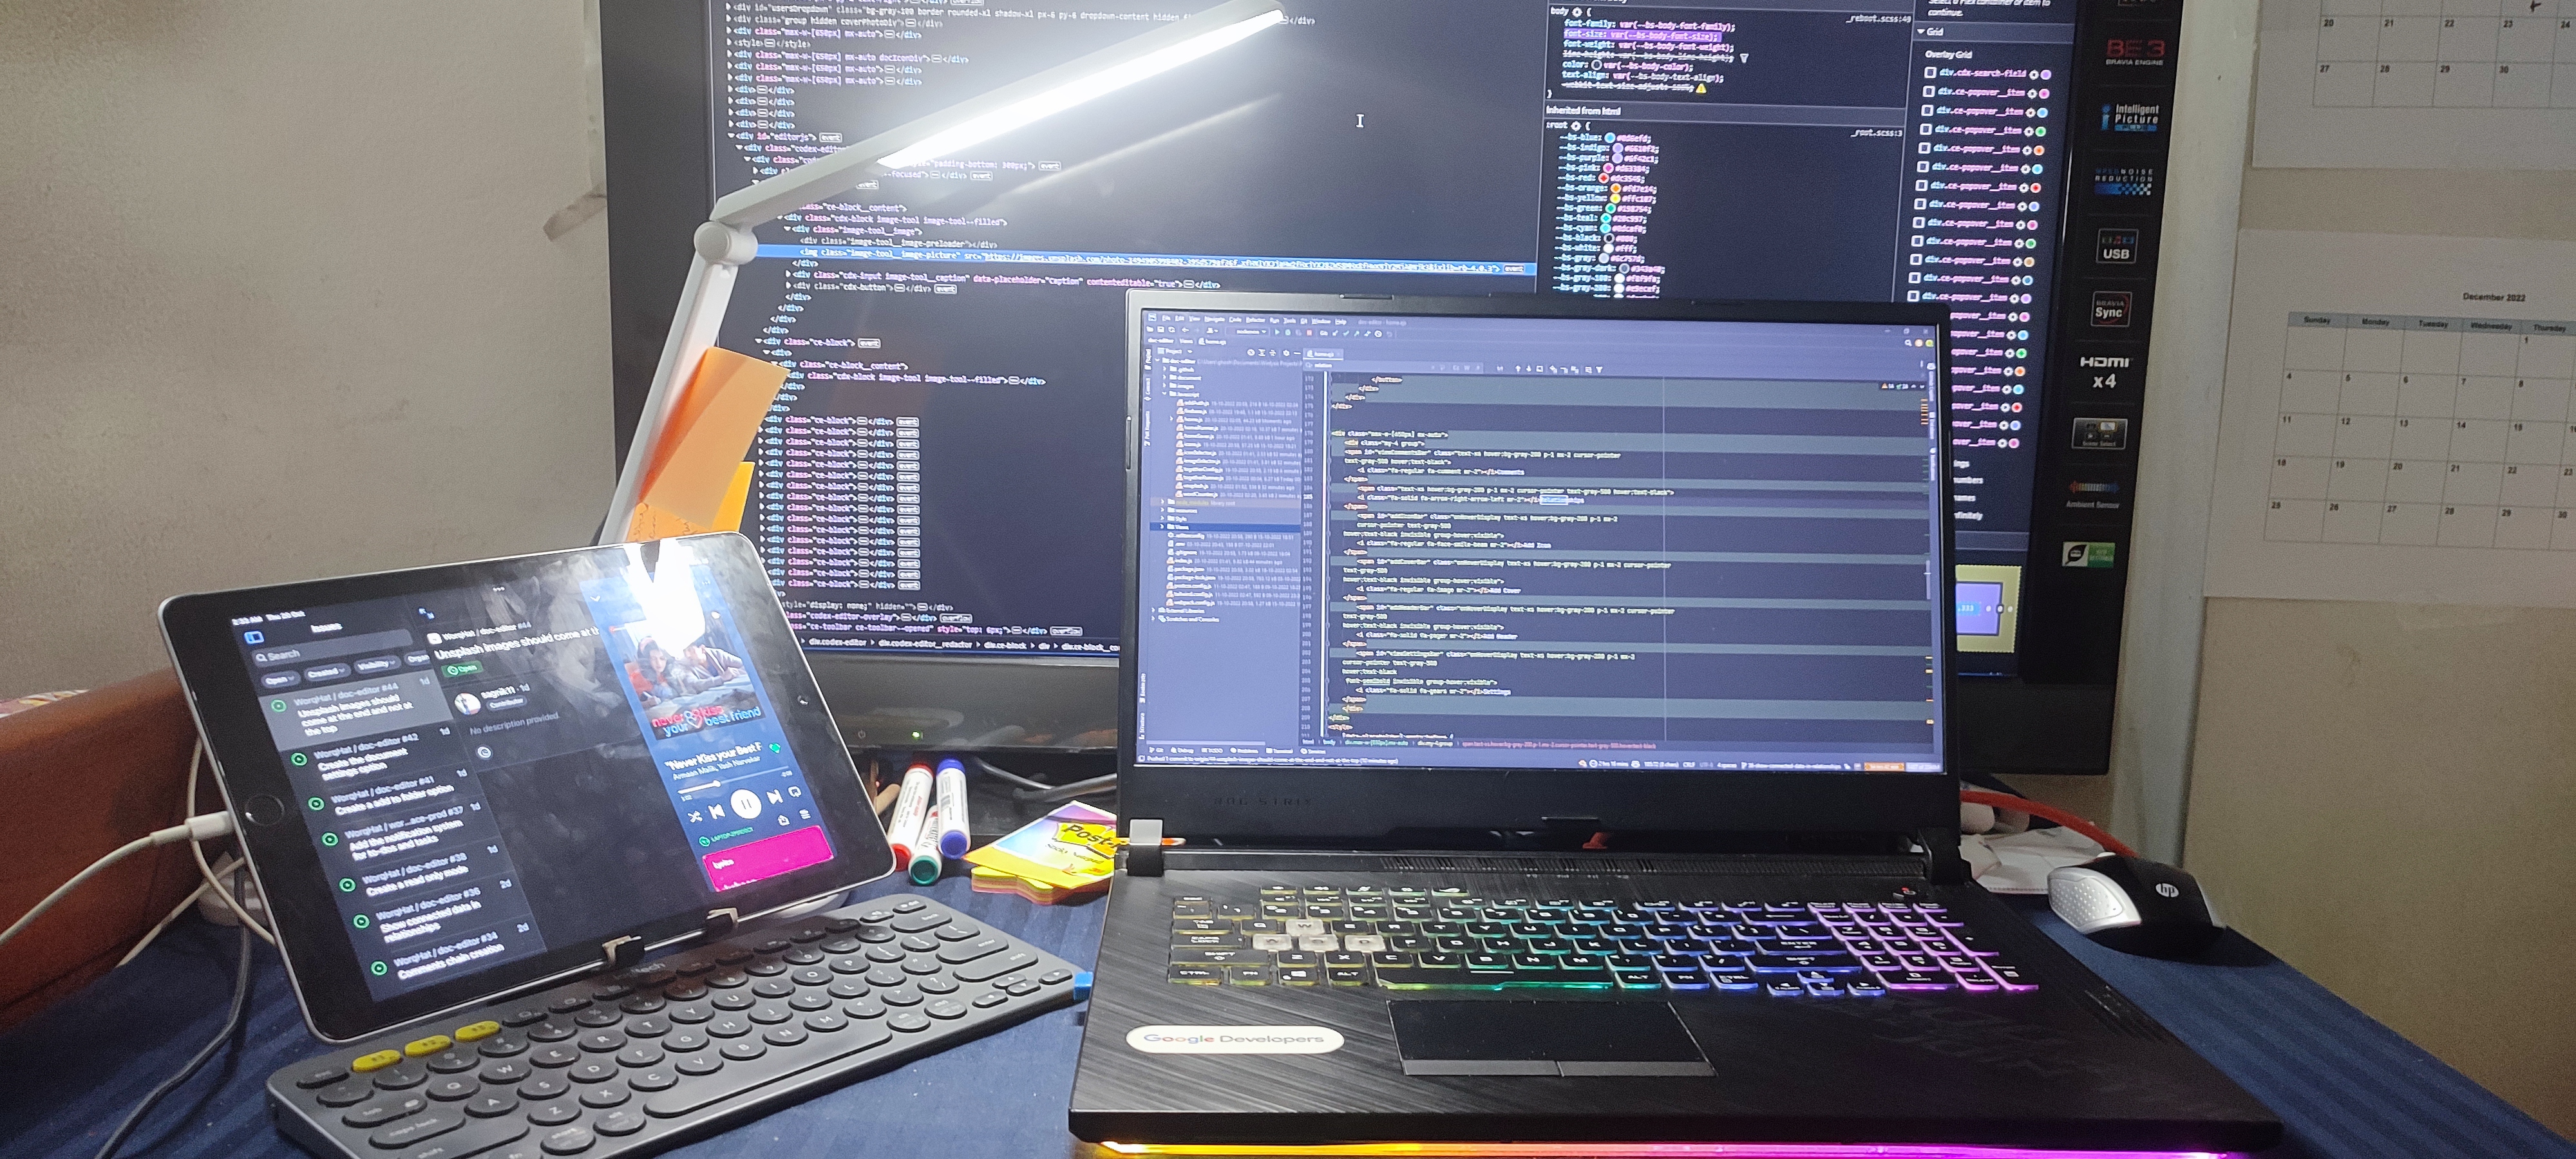 A Background Showing all the devices for code